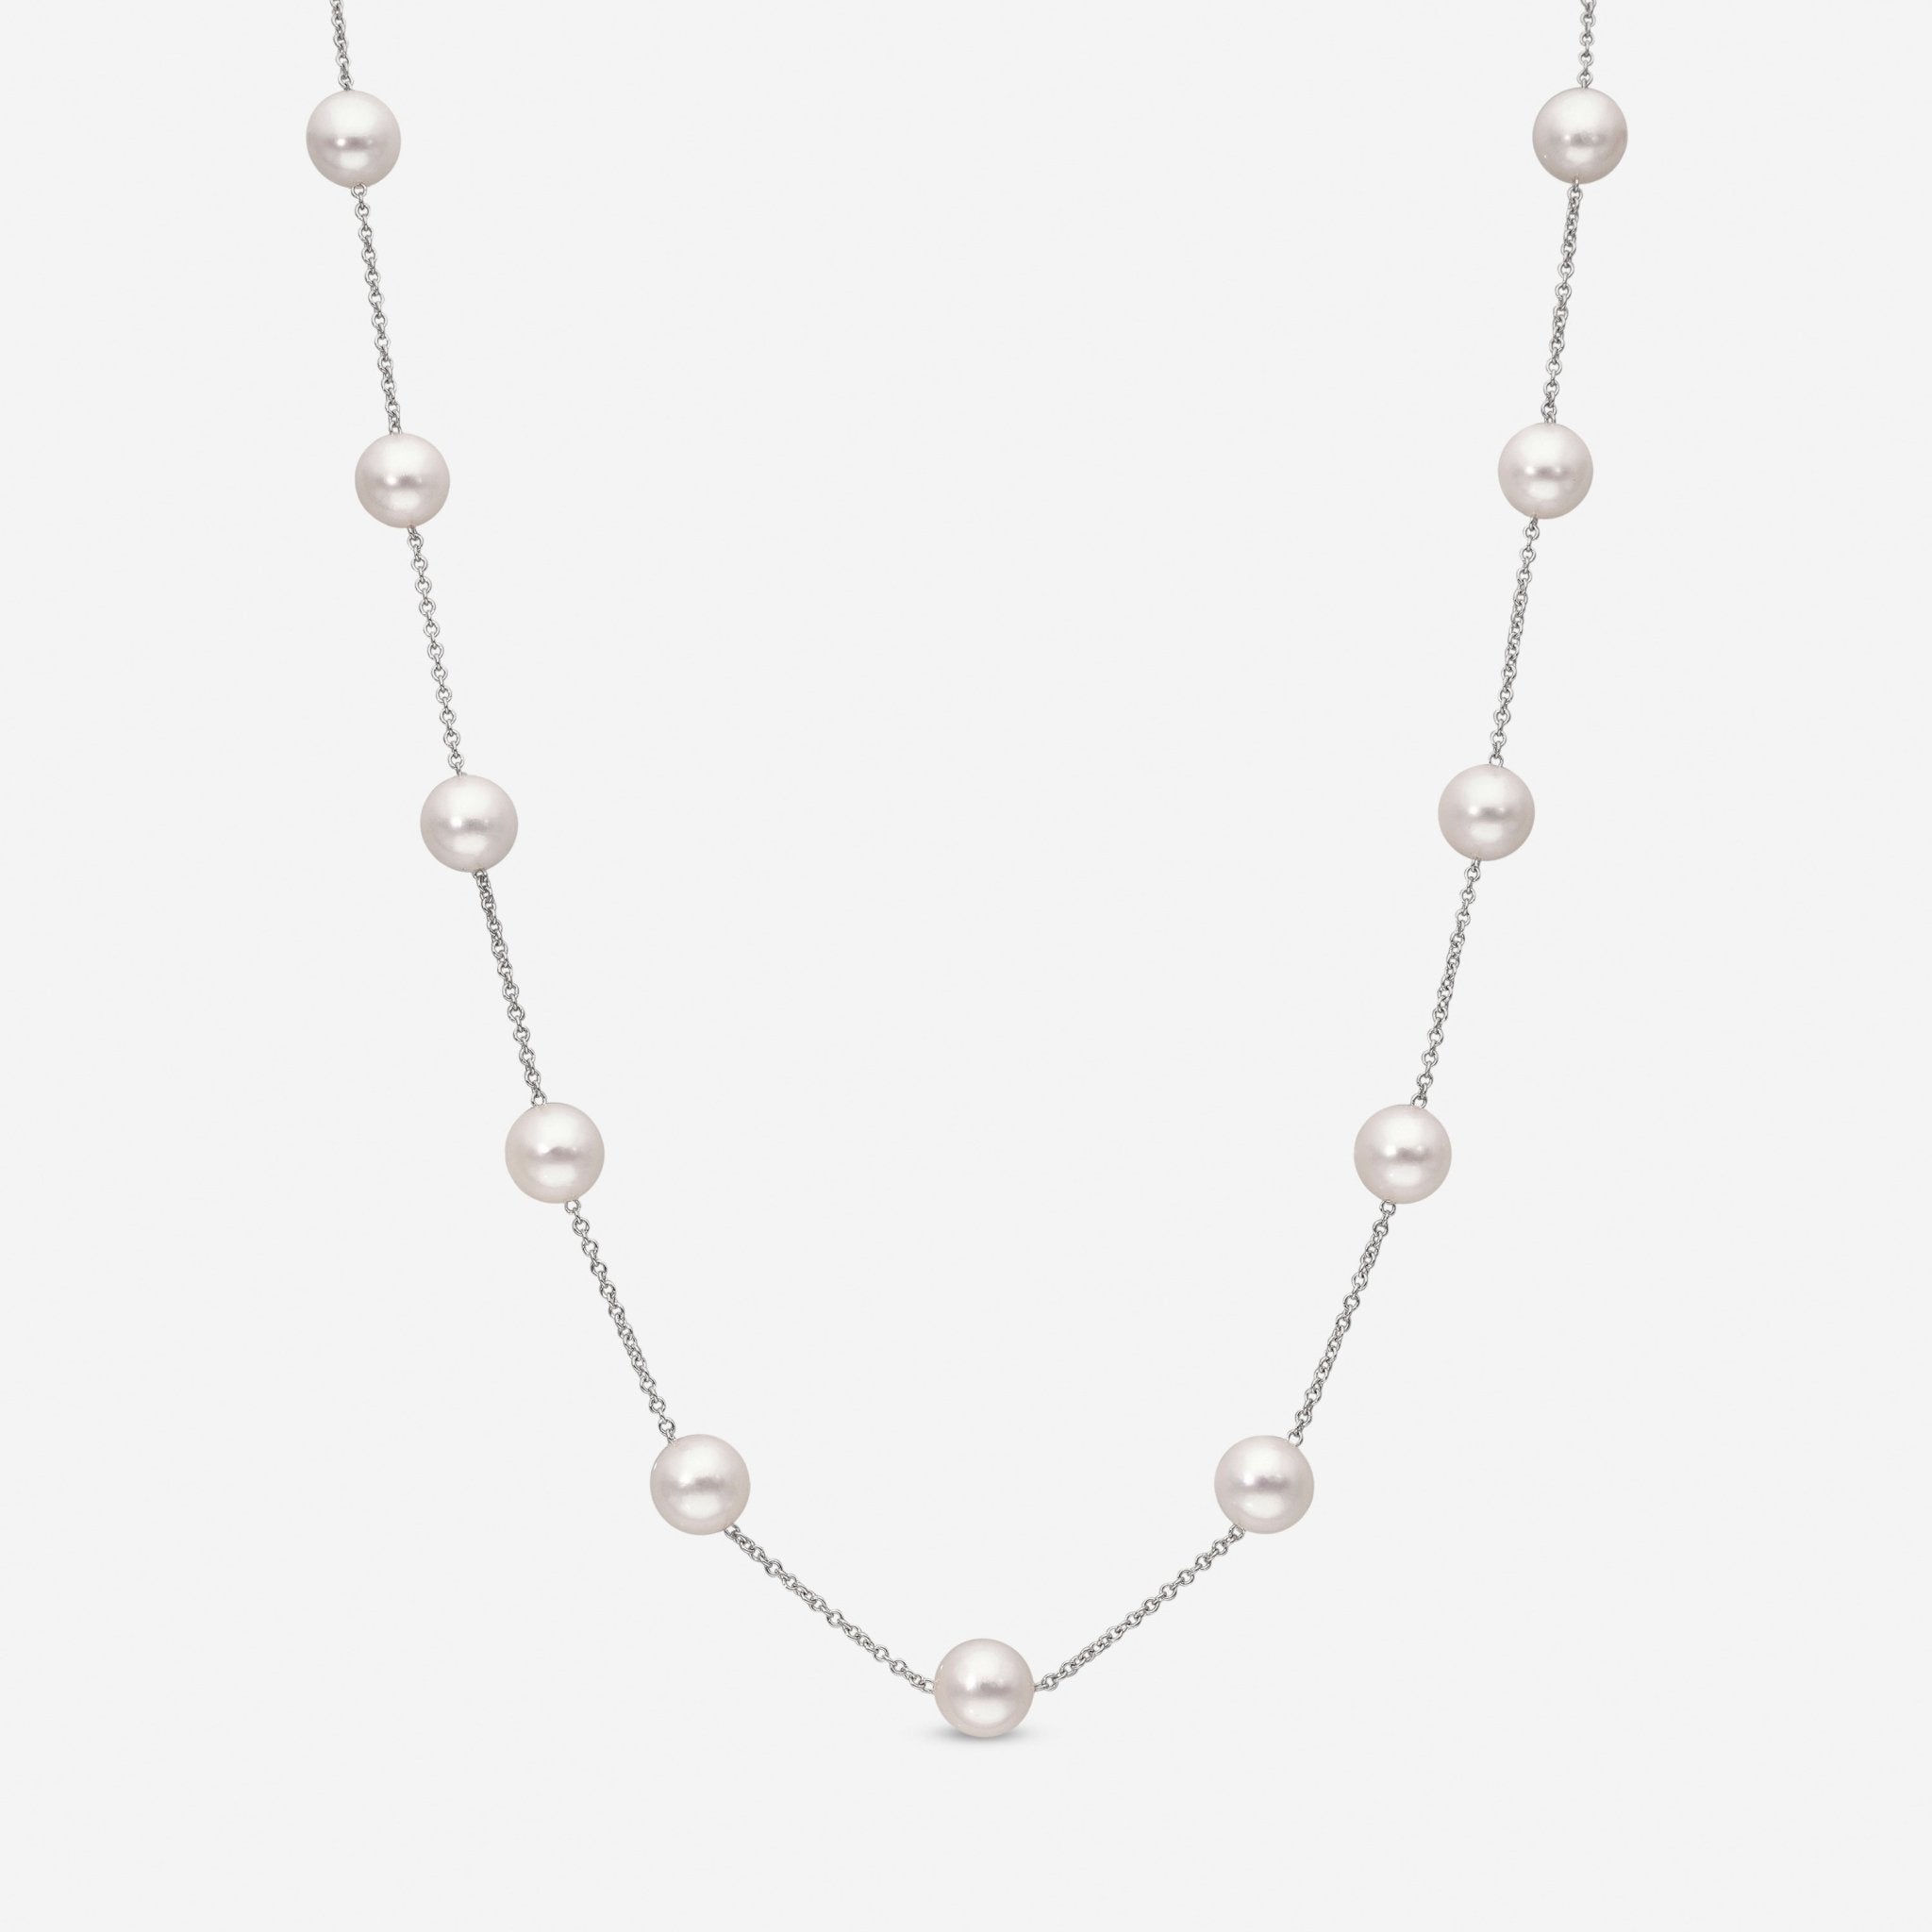 Assael 18K White Gold, Japanese Akoya Cultured Pearl Collar Necklace NTC - 775PCDW1 - THE SOLIST - Assael